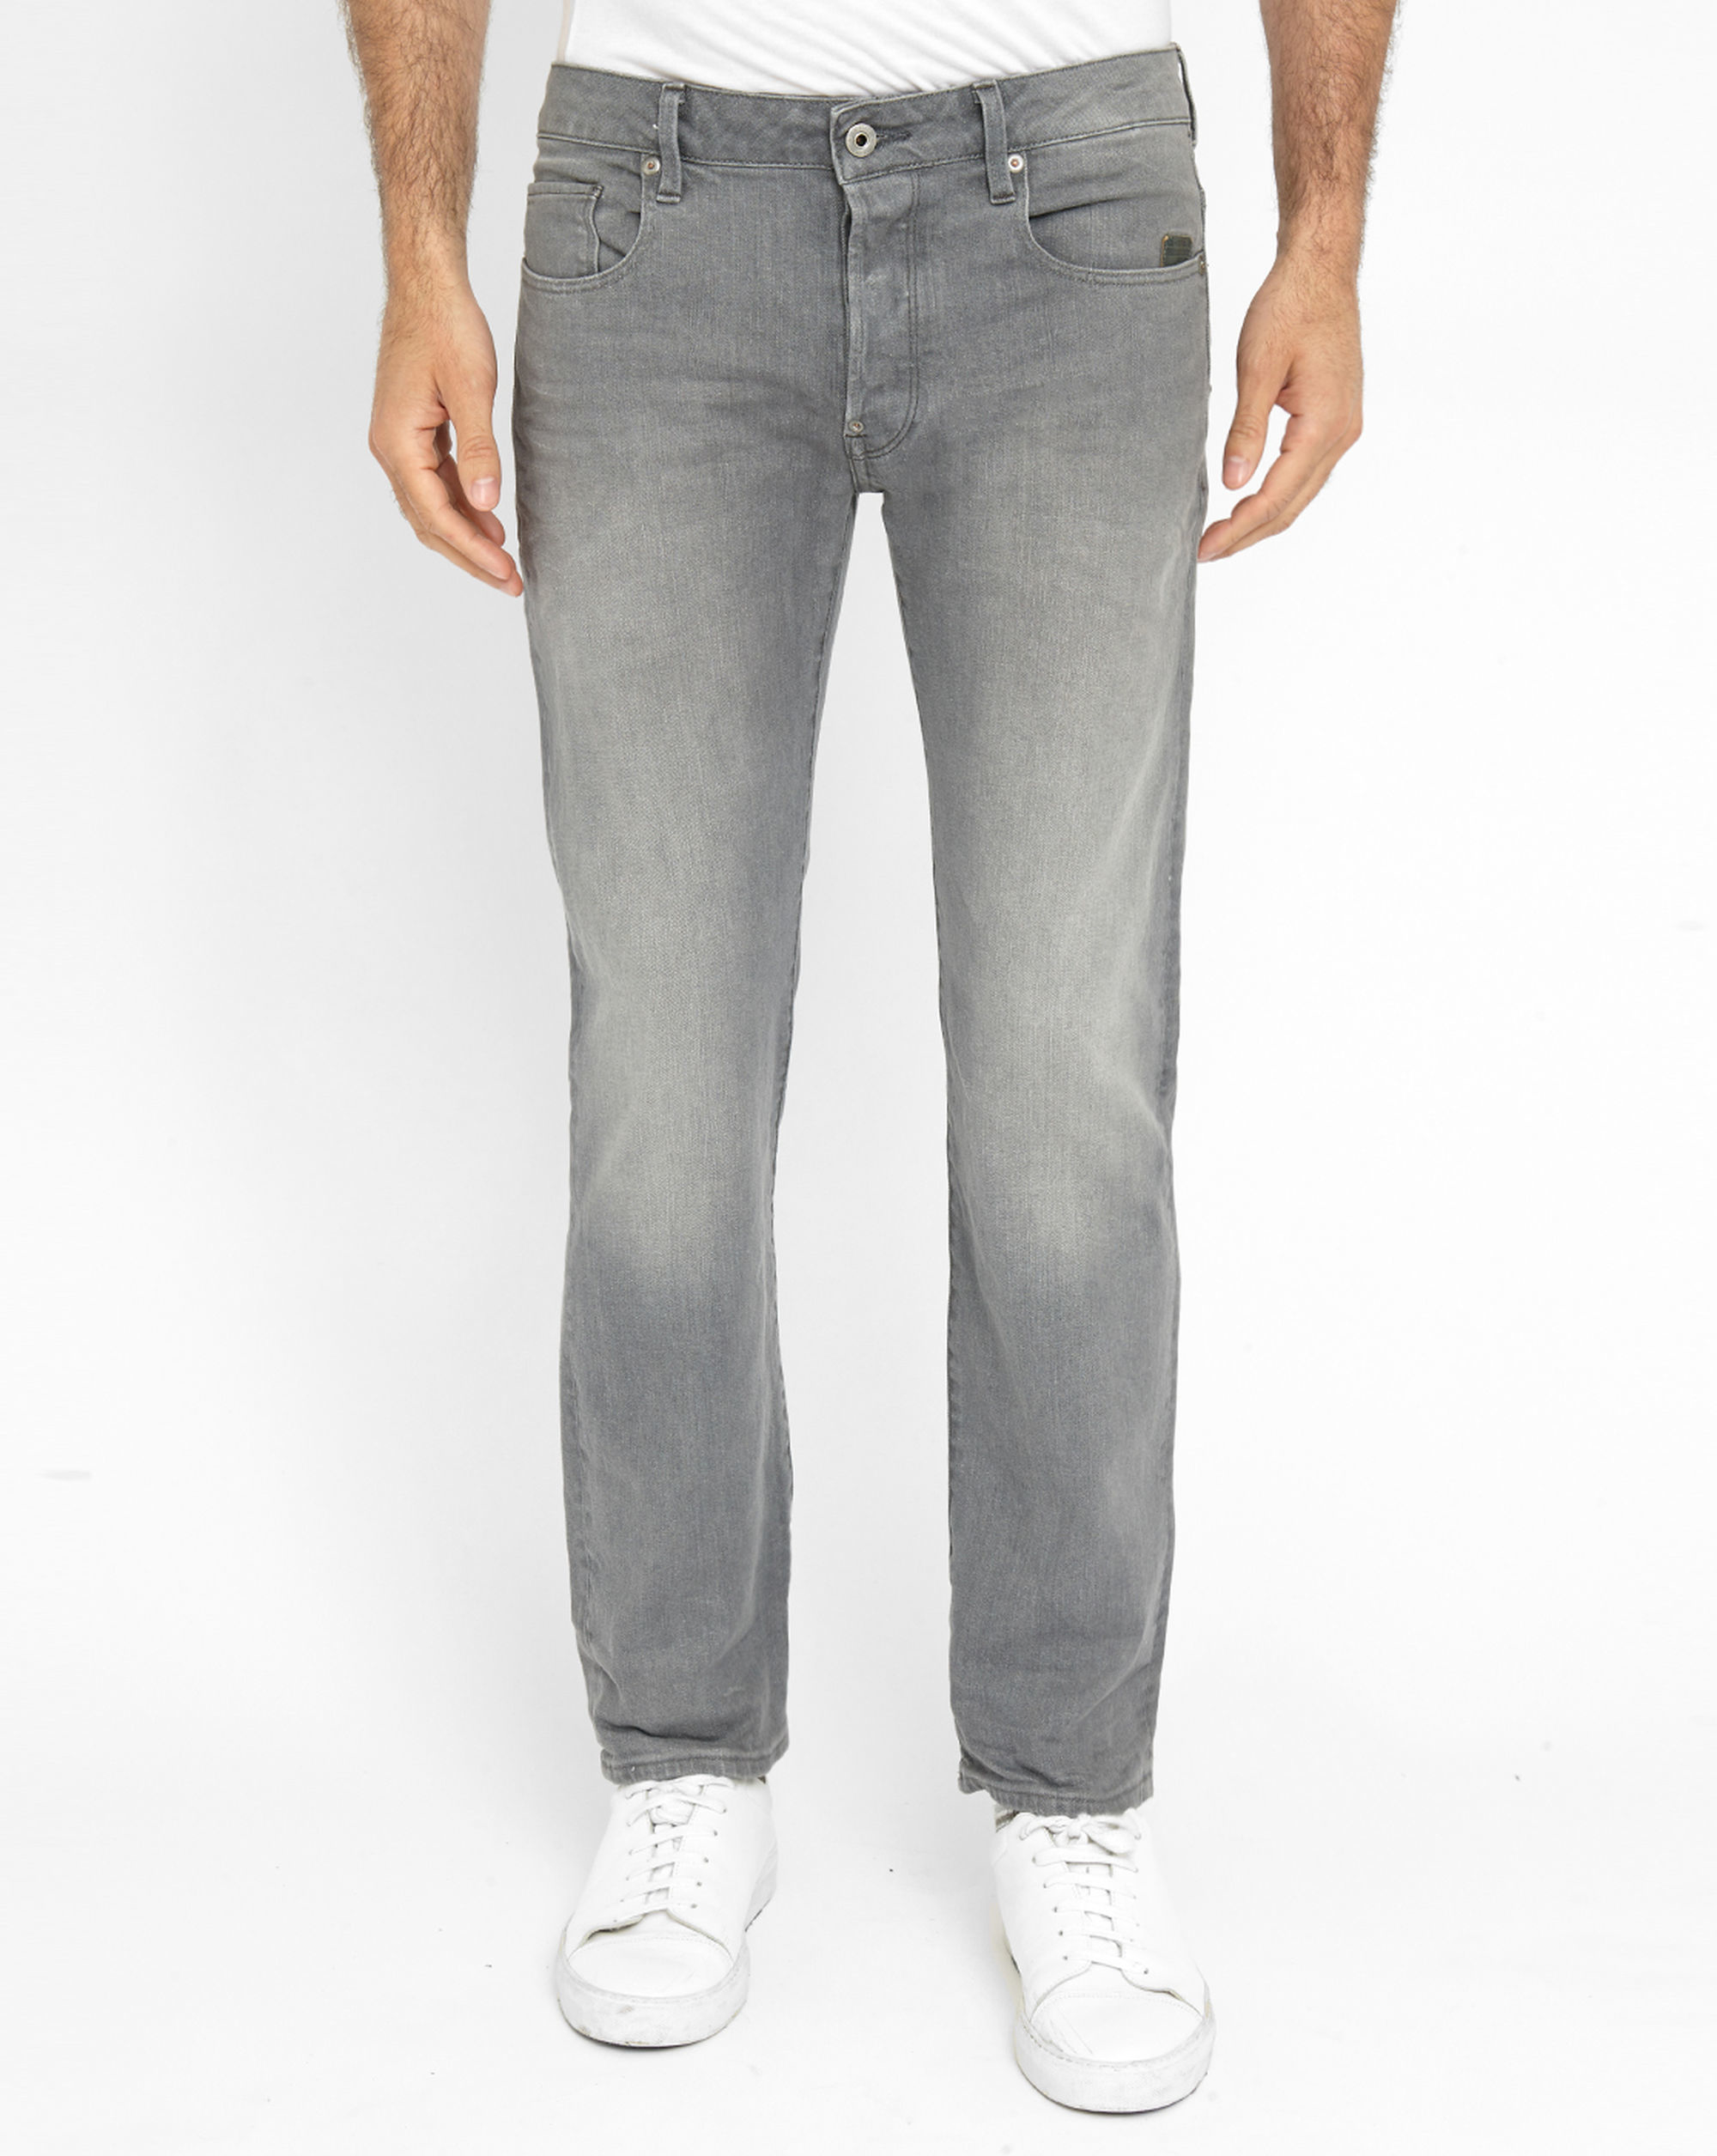 G-star raw Grey Revend Straight Stretch Jeans in Gray for Men | Lyst